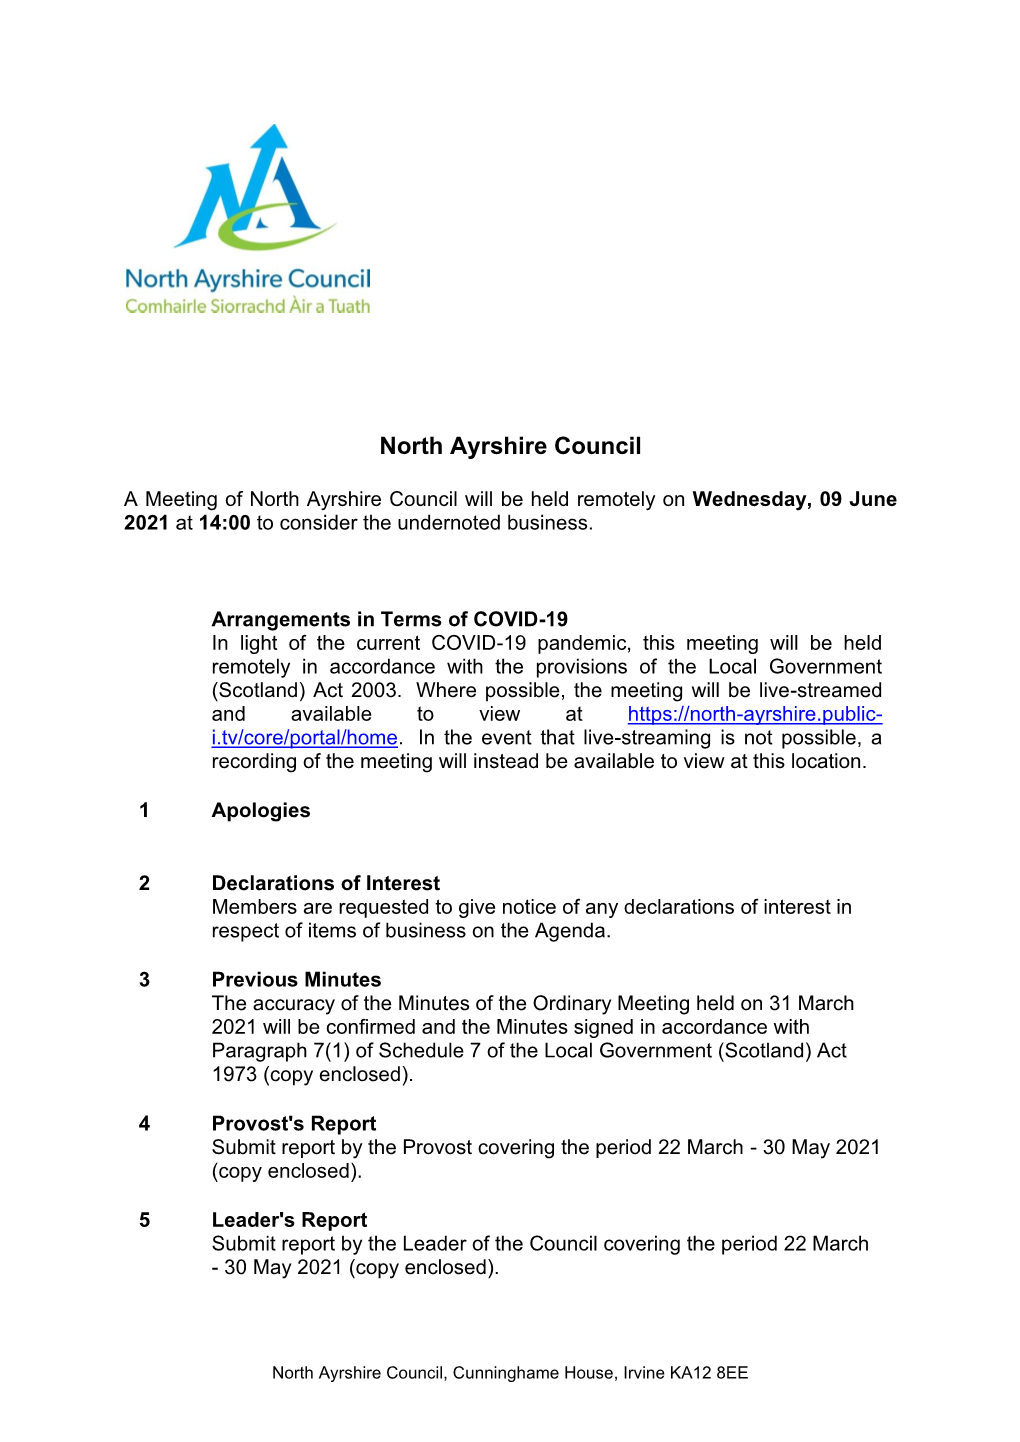 A Meeting of North Ayrshire Council Will Be Held Remotely on Wednesday, 09 June 2021 at 14:00 to Consider the Undernoted Business